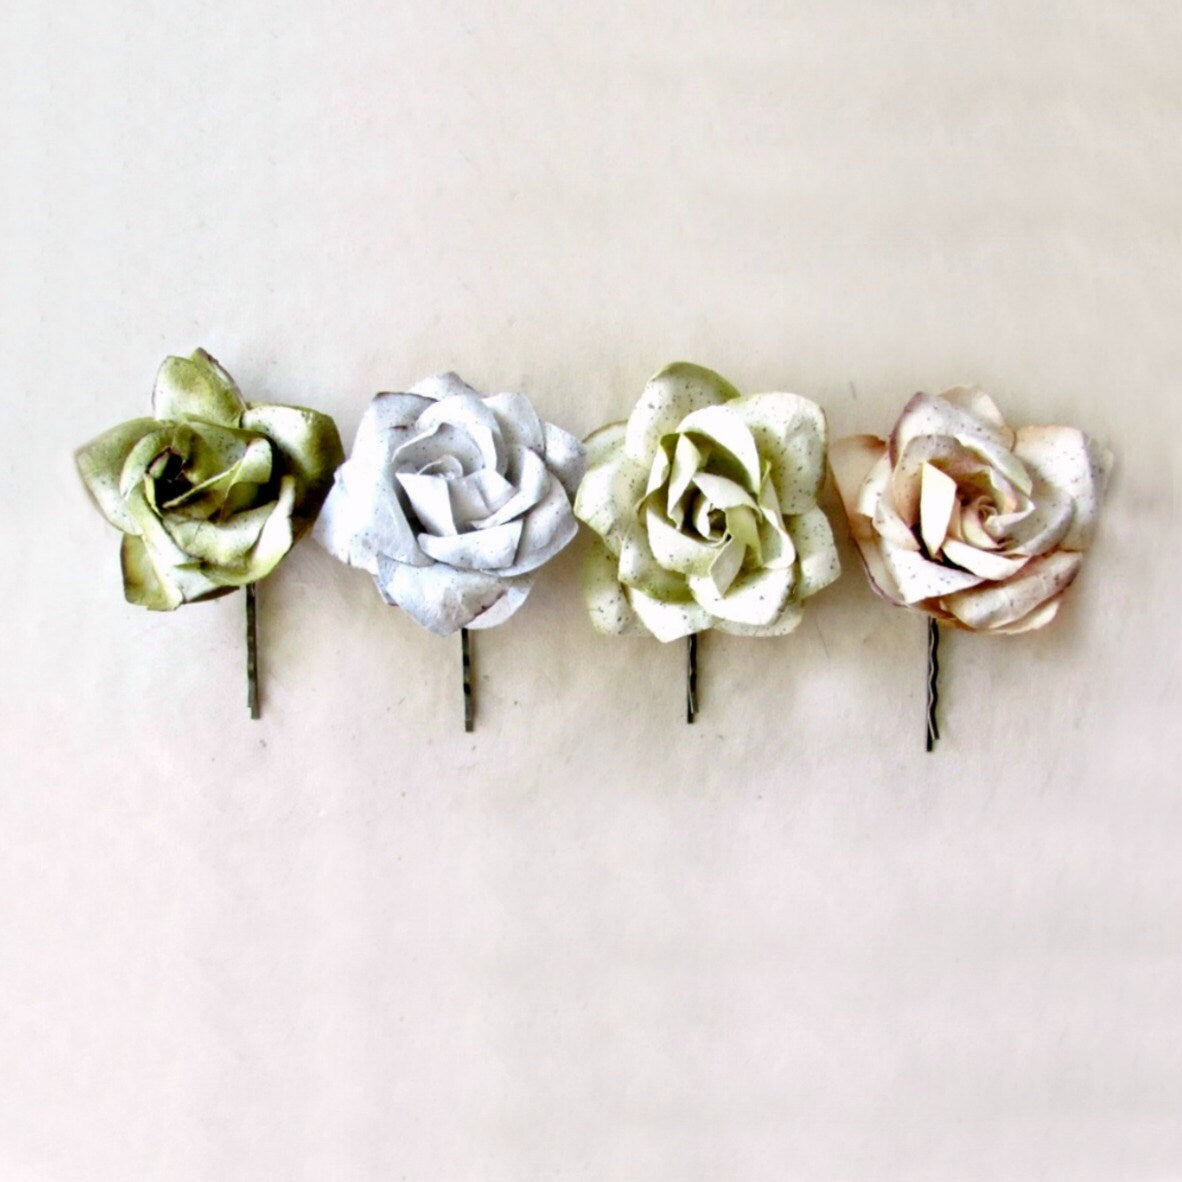 Floral Hair Accessories, Bridal Hair Pins Set, Rustic Paper Flowers, Sage Green Gray, Chartreuse Champagne, Woodland Wedding Flower Pins